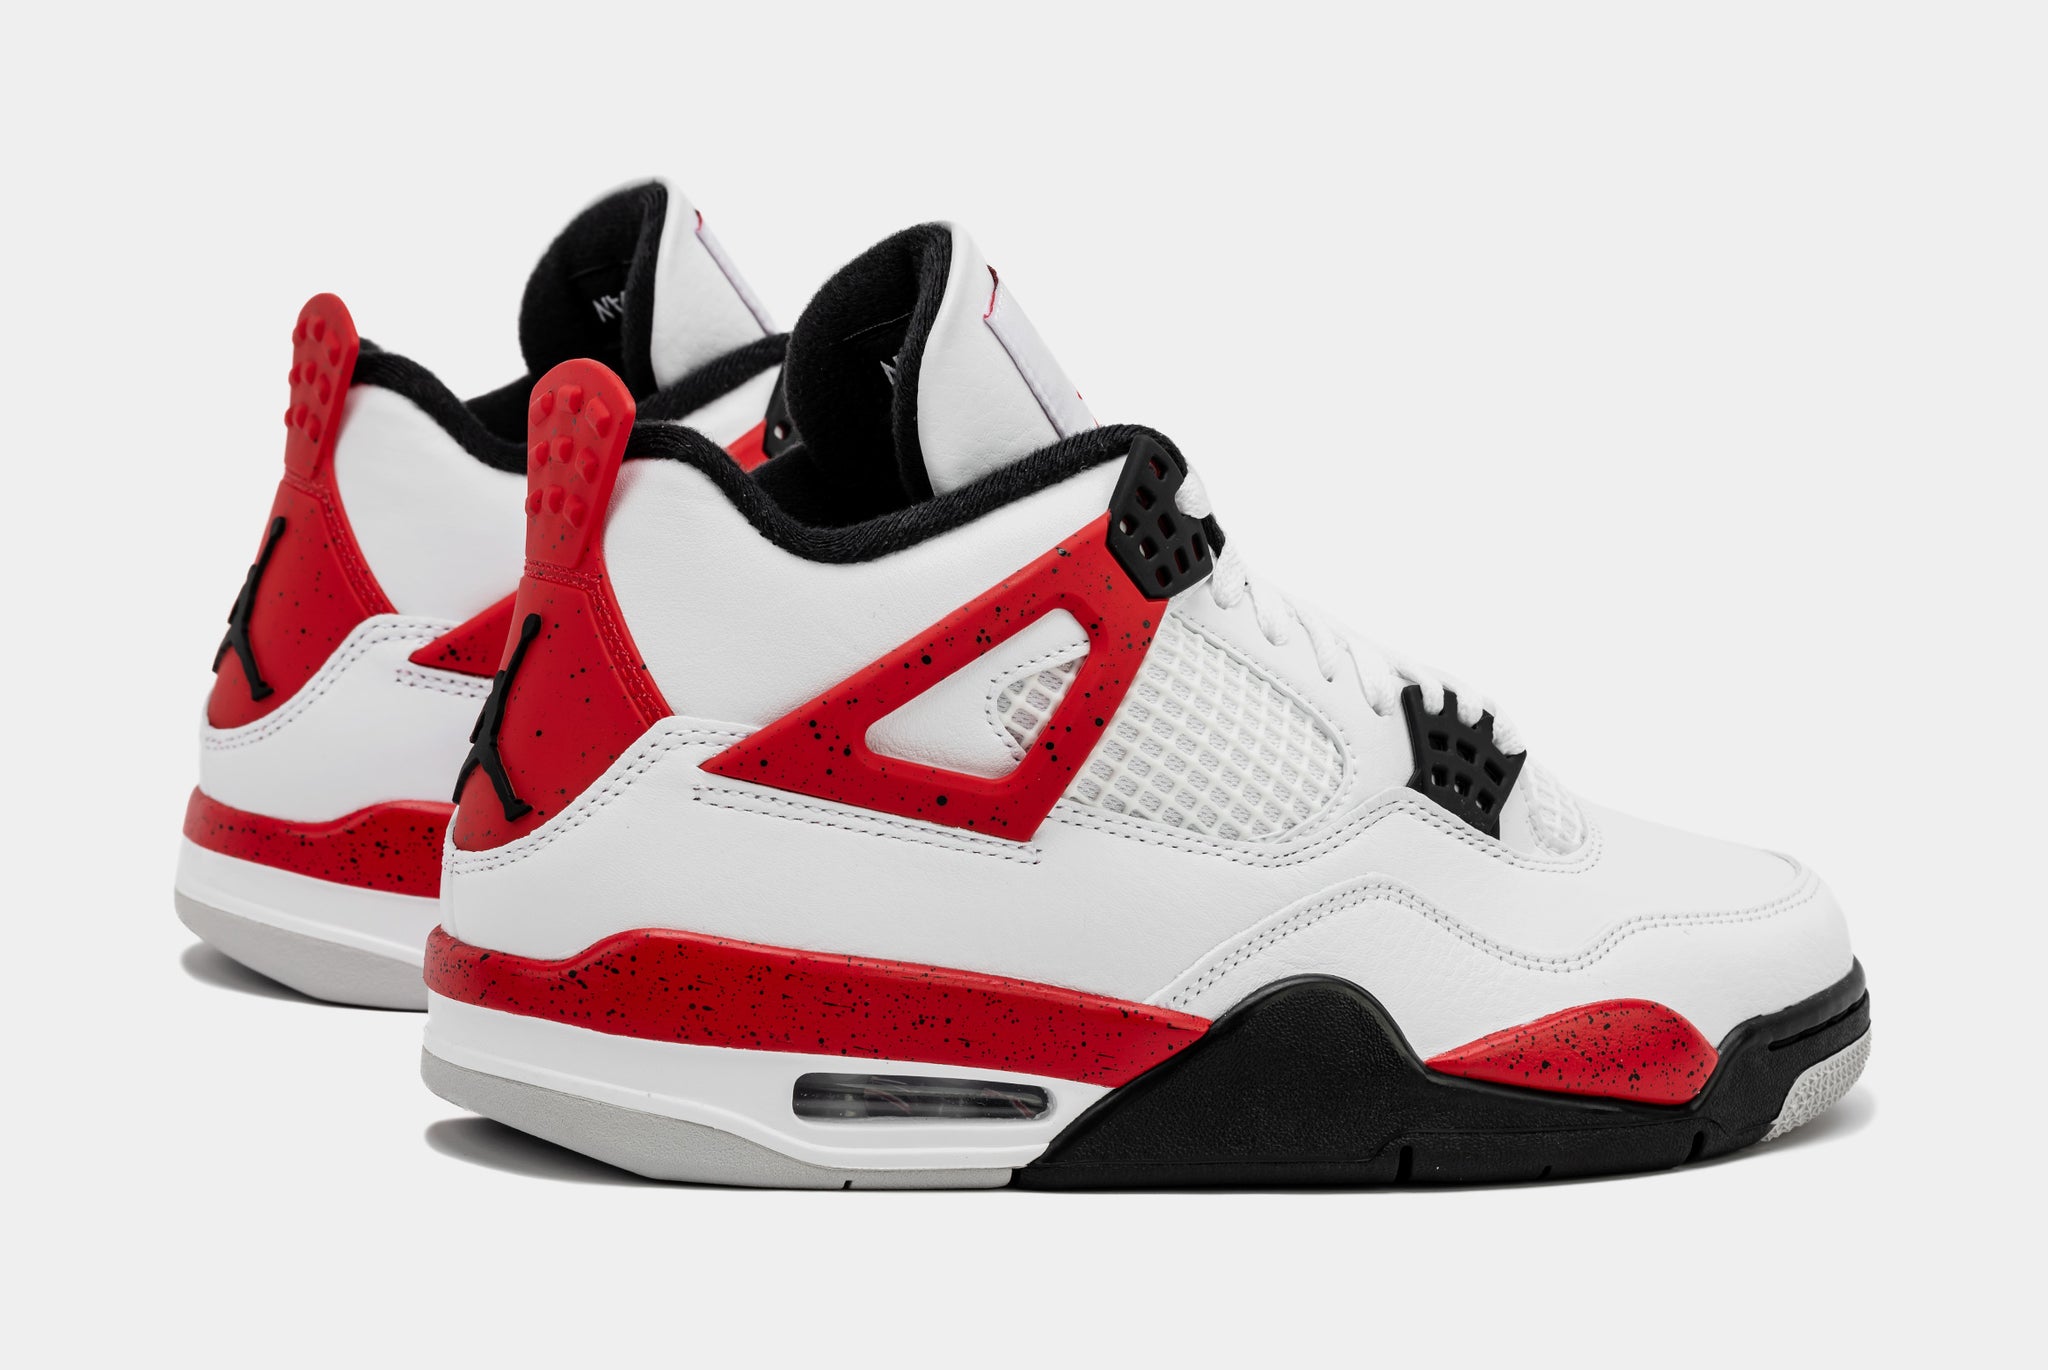 Air Jordan 4 Retro Red Cement Mens Lifestyle Shoes (White/Red) Limit One  Per Customer